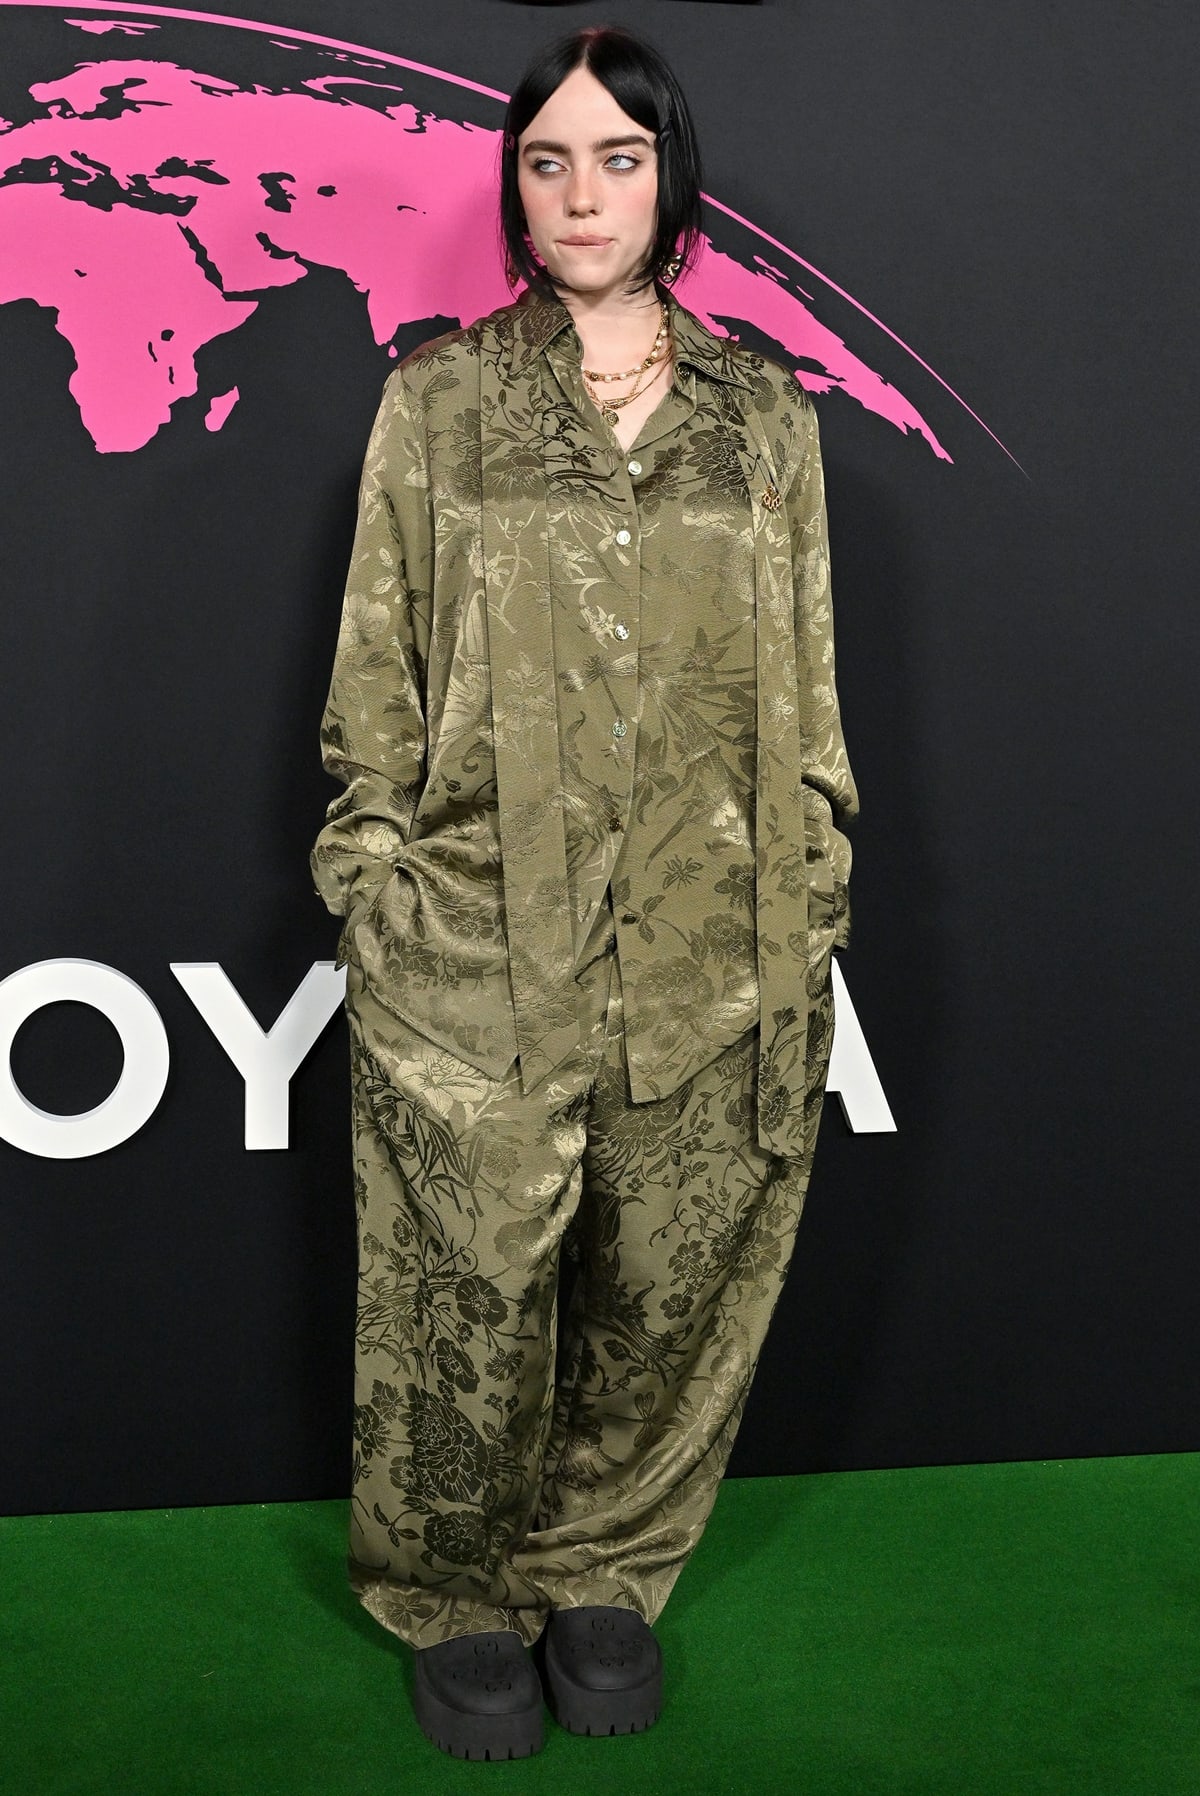 Billie Eilish in a recycled Gucci outfit at the Environmental Media Association Awards Gala